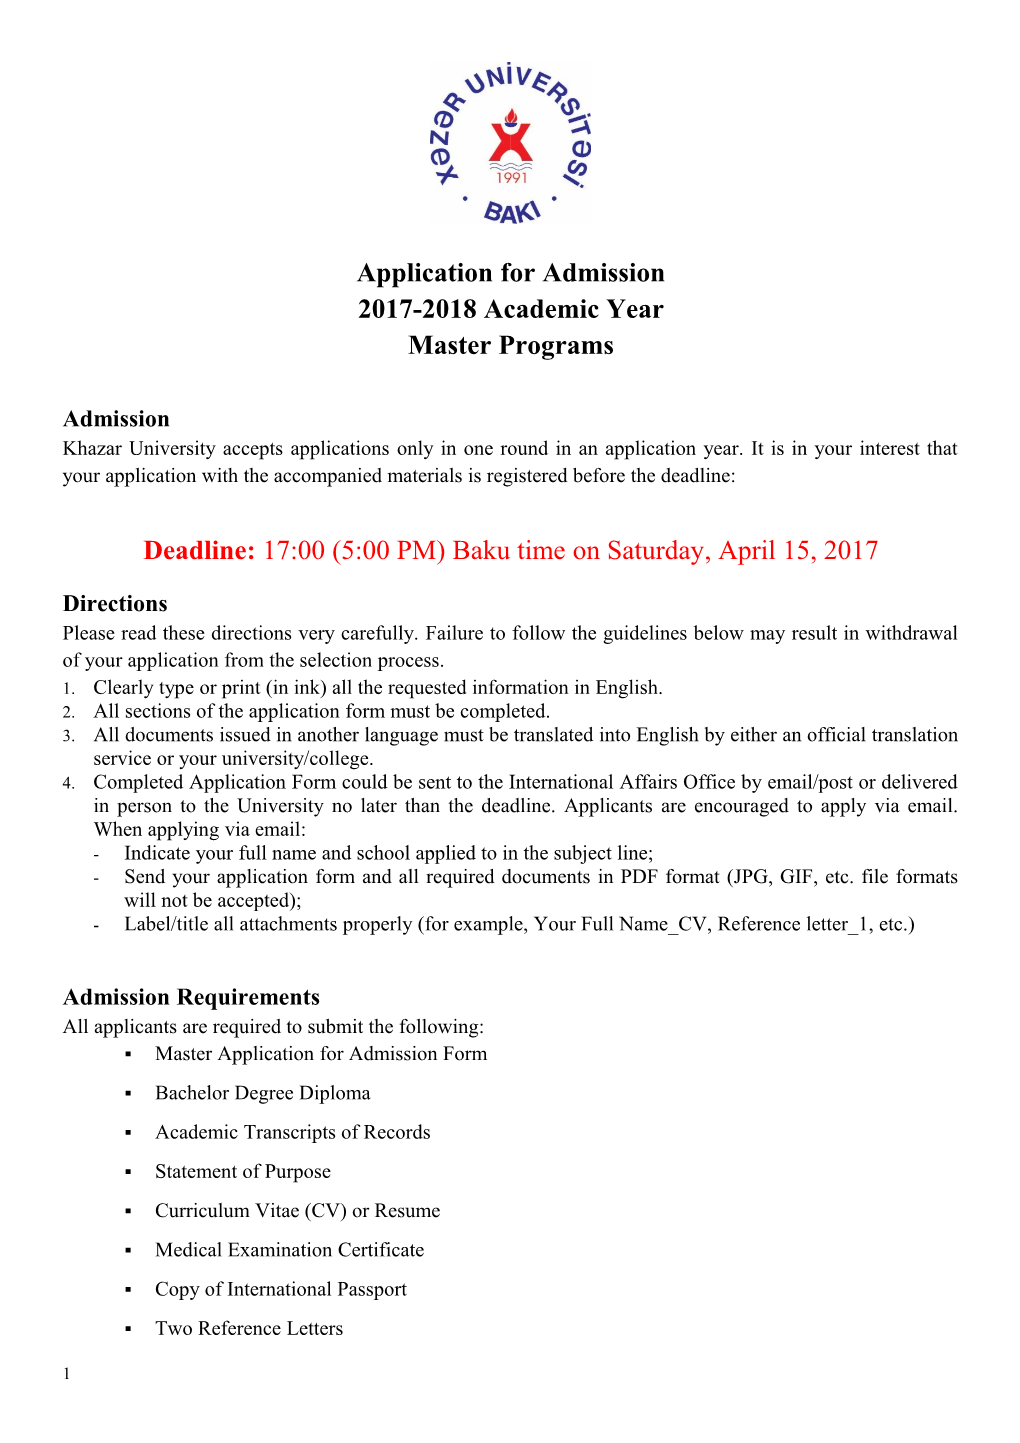 Application for Admission s17